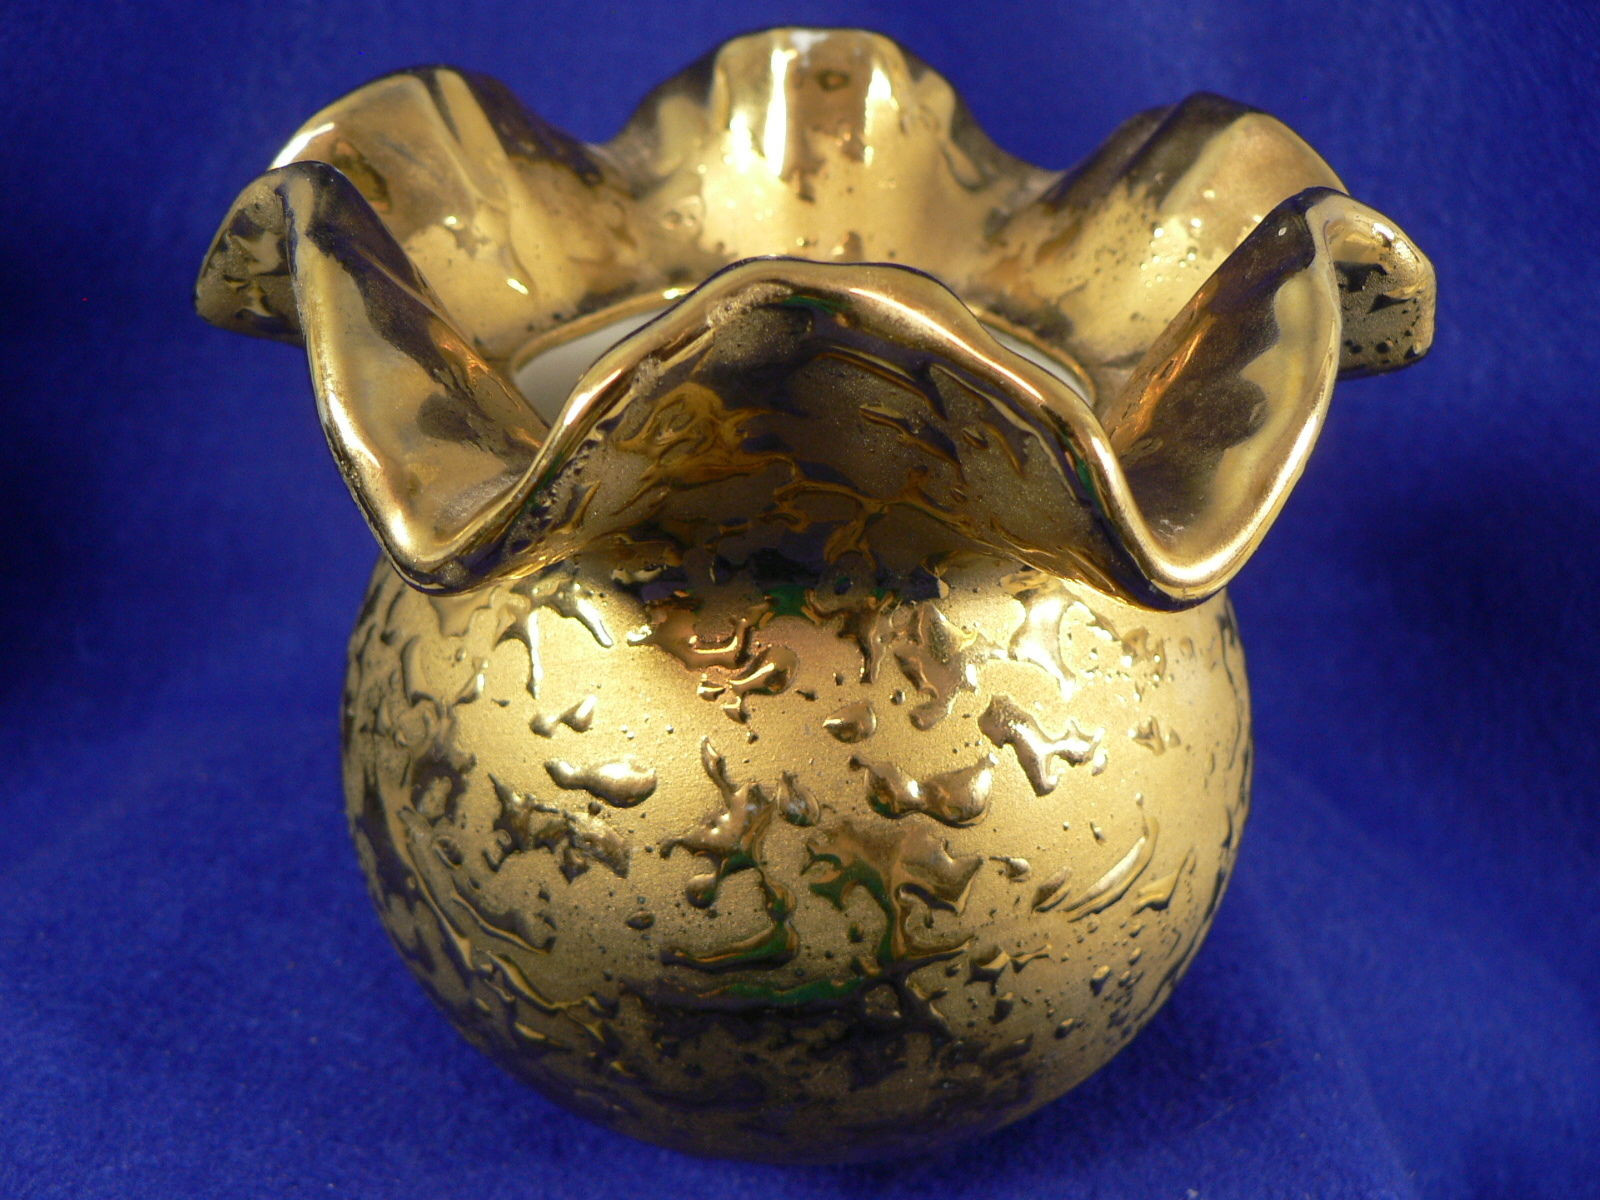 29 Popular Weeping Gold Vase 2024 free download weeping gold vase of ruffled edge vase bel terr china usa bright weeping 22 kt gold art intended for ruffled edge vase bel terr china usa bright weeping 22 kt gold art pottery